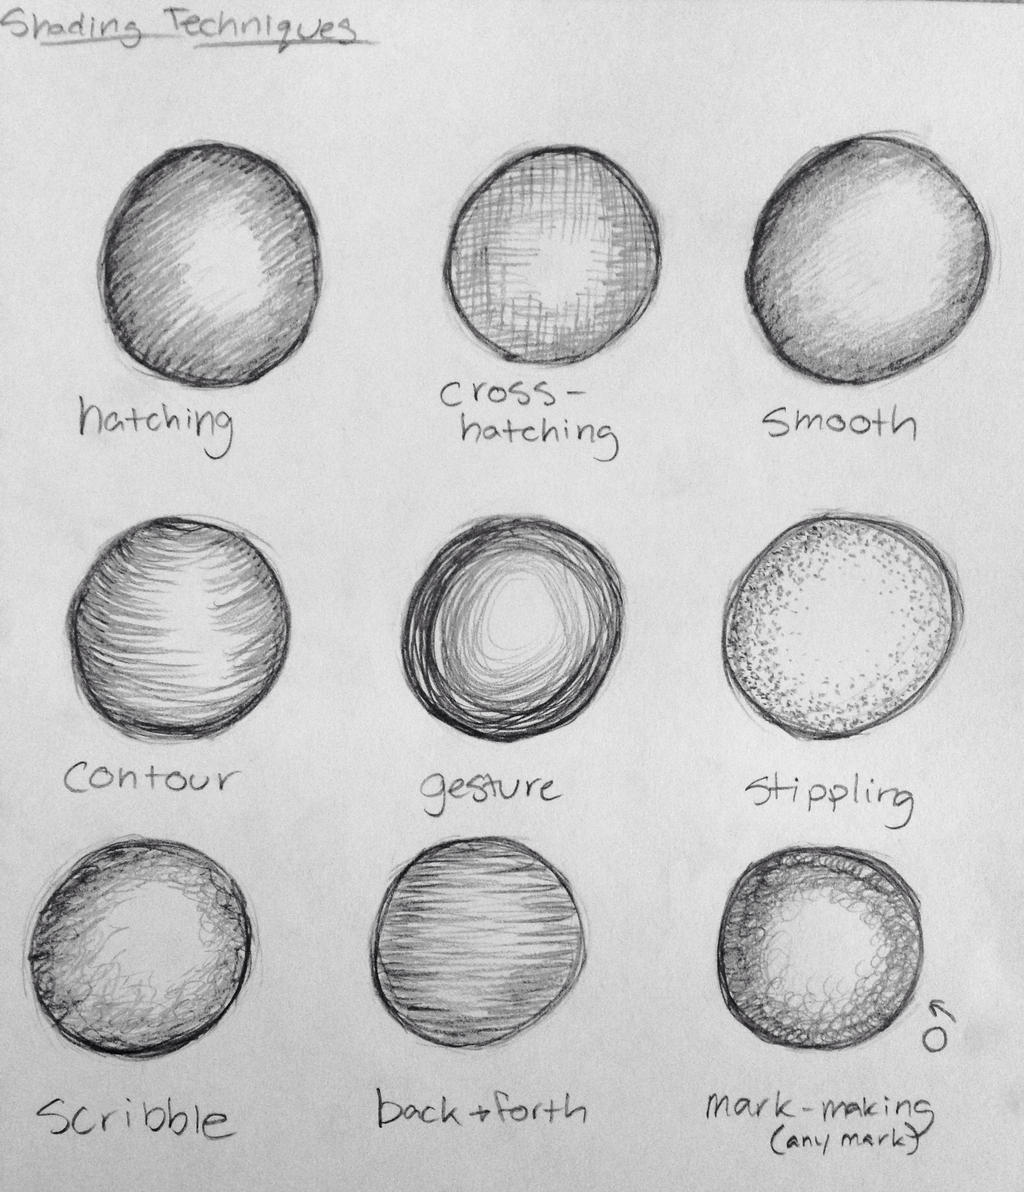 Shading Techniques by smileymaste on DeviantArt